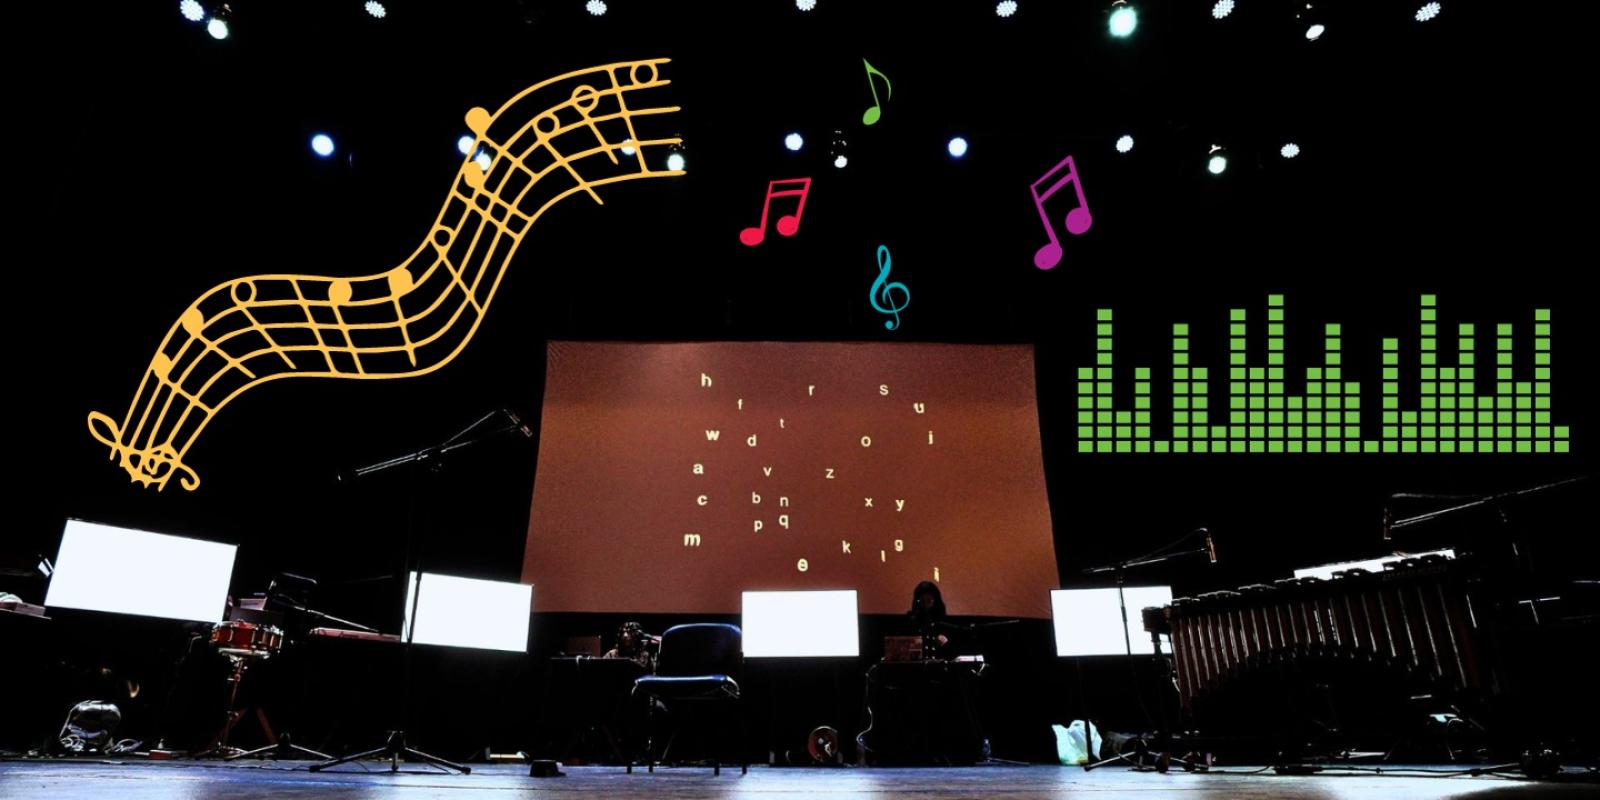 A stage with ultiple computer screens and a projected screen with assorted letters in white text, graphic overlayed shows musical notes in multiple different colors